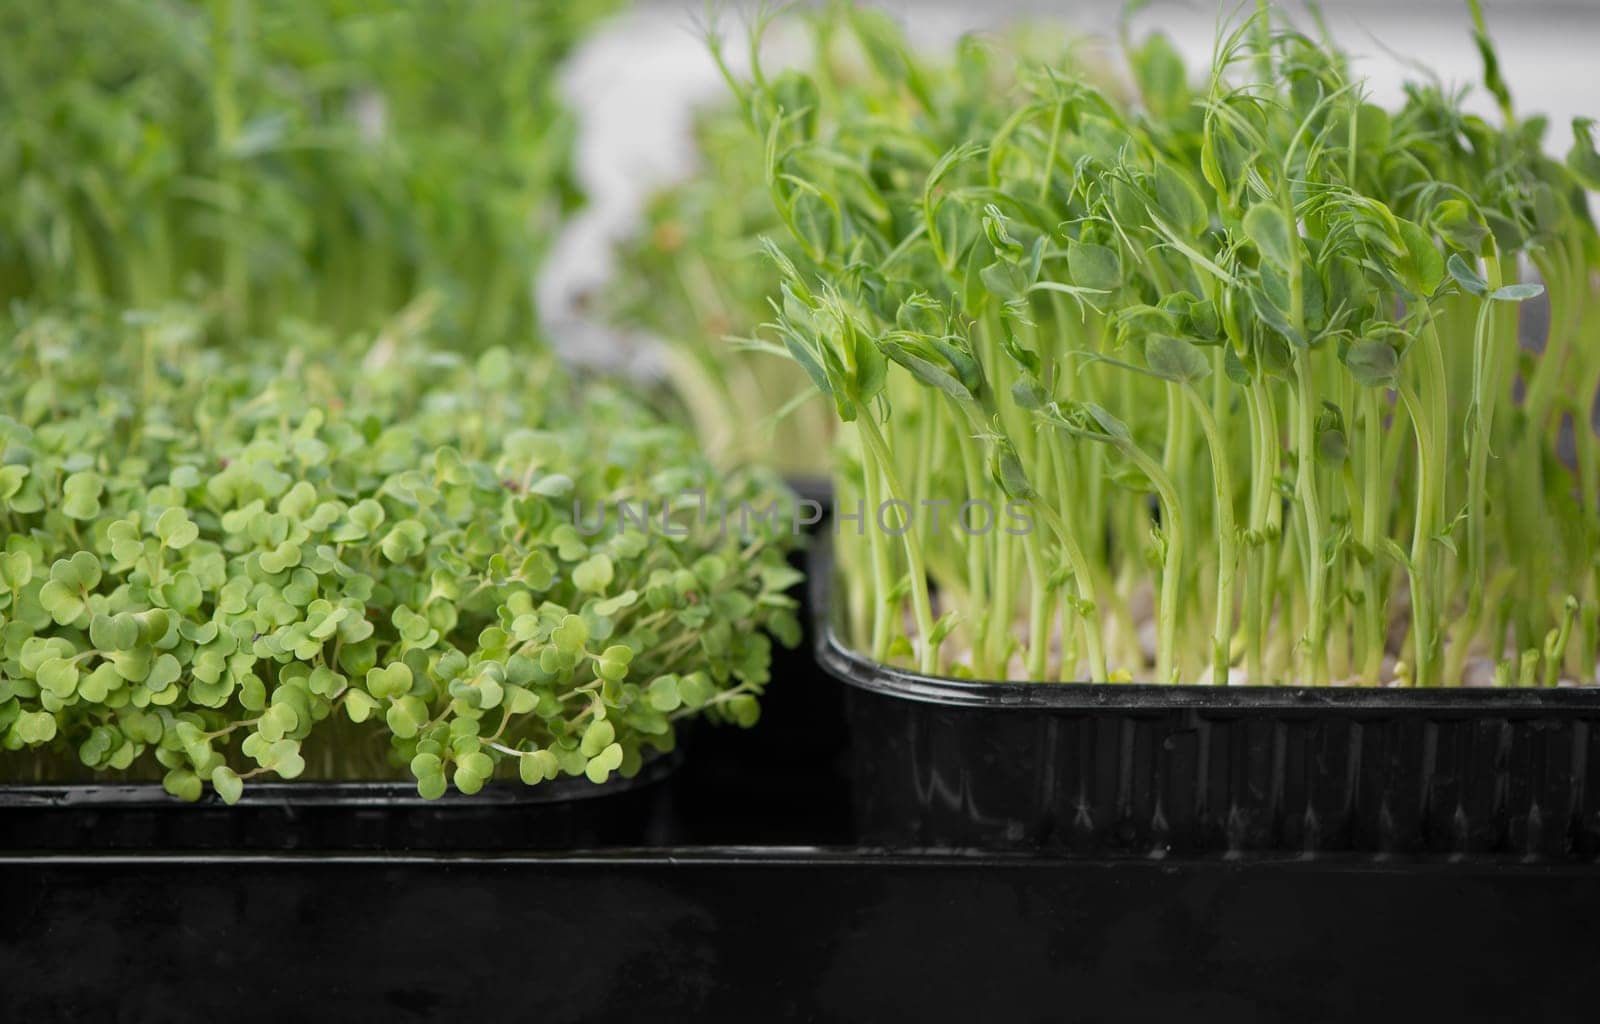 The concept of a healthy diet, growing microgreens - boxes of red amaranth, mustard, arugula, peas, cilantro on a home white windowsill by aprilphoto